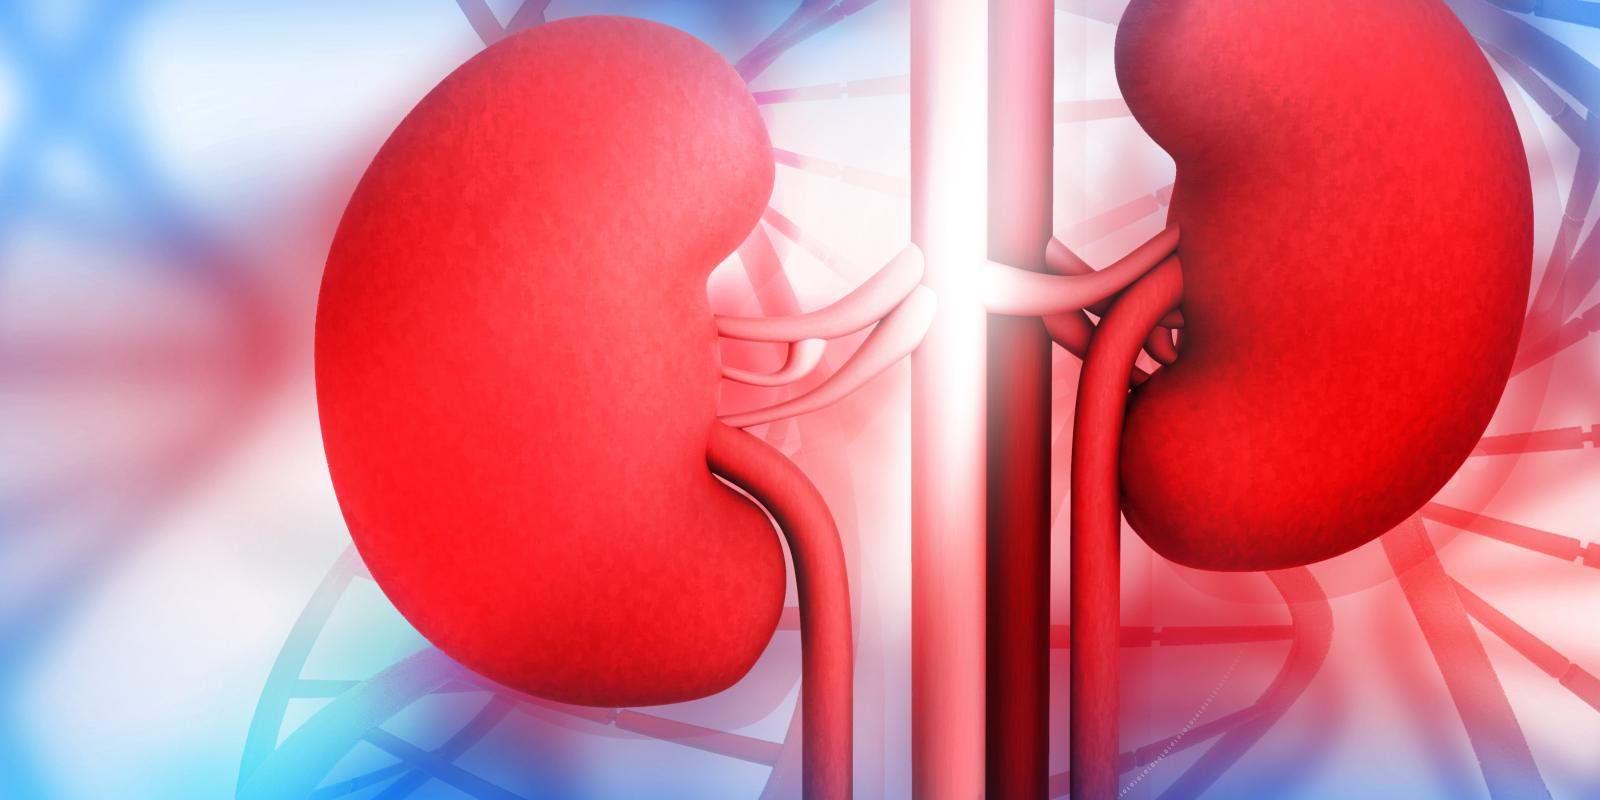 Important Tests for Diagnosing Kidney Disease